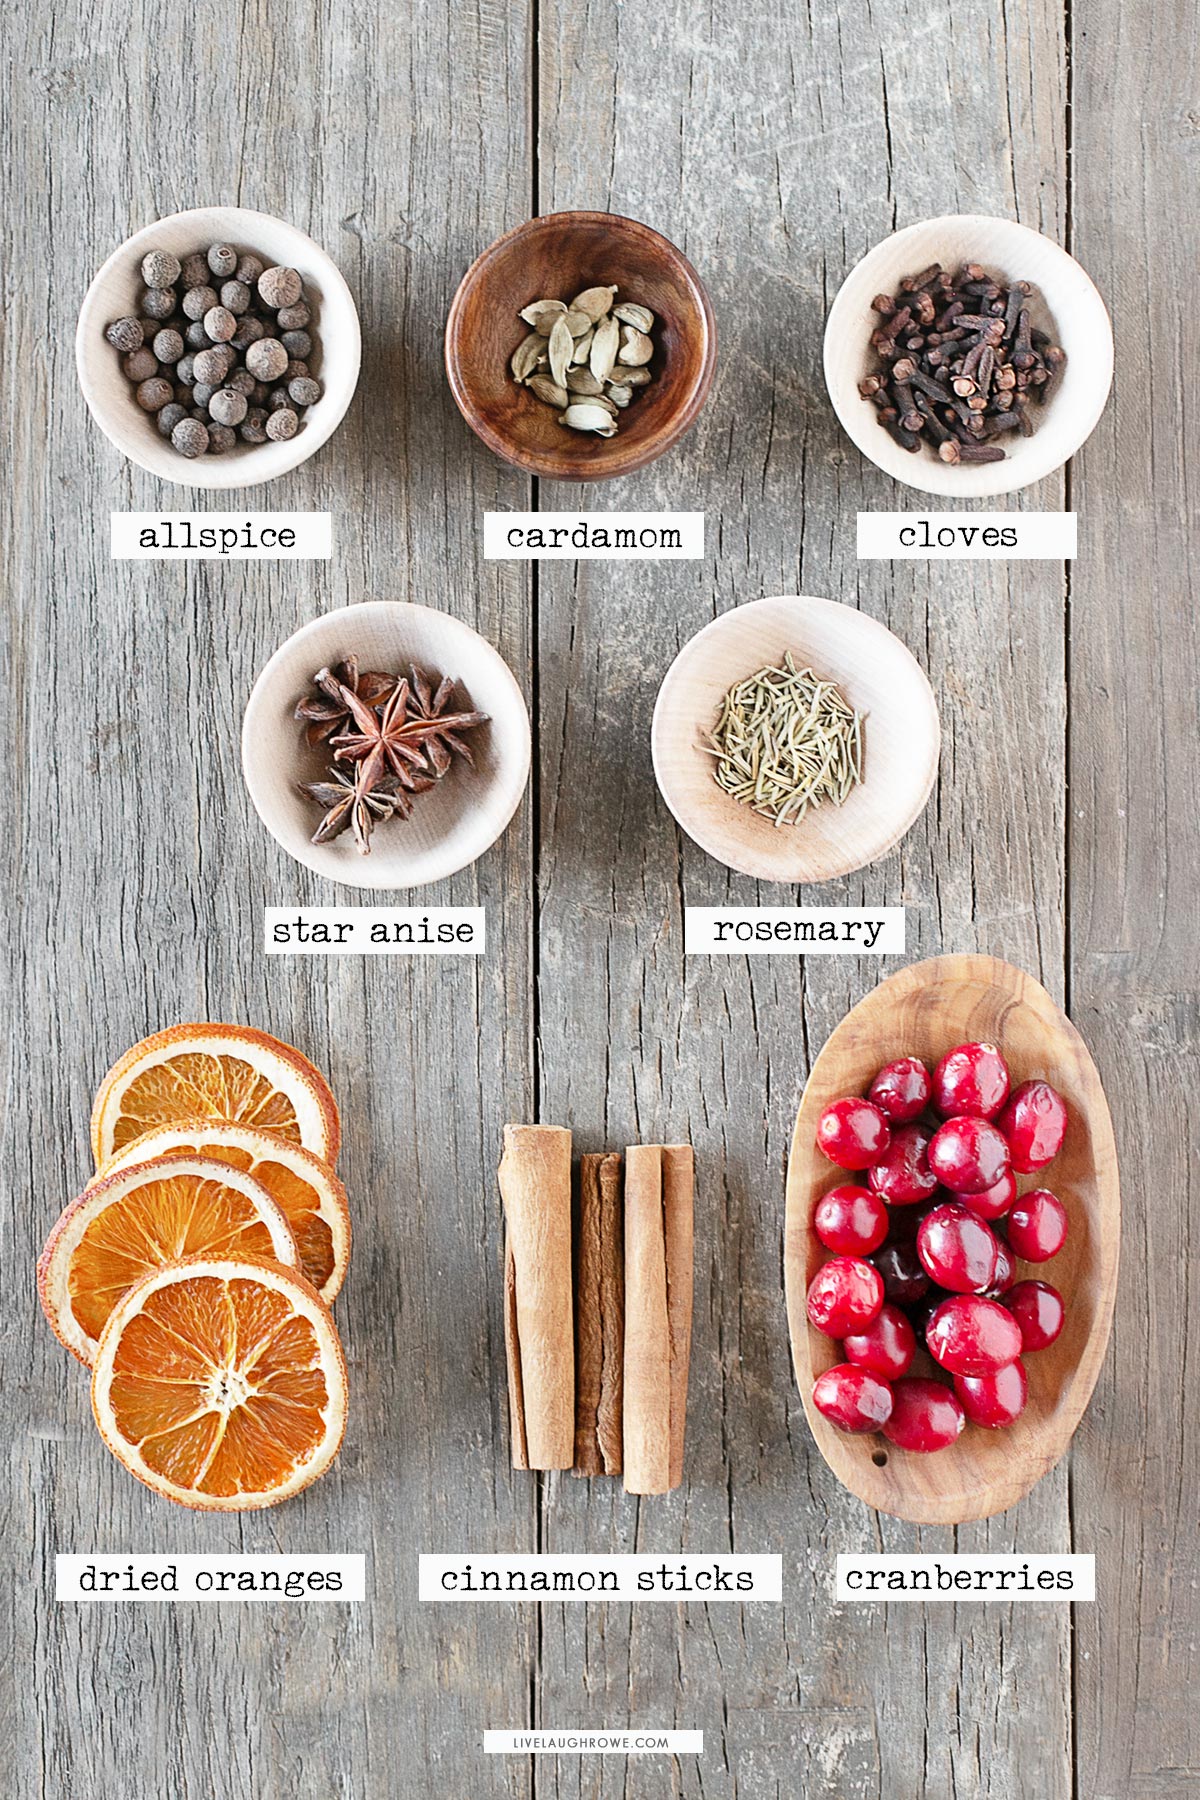 Ingredients for Mulling Spice Recipe